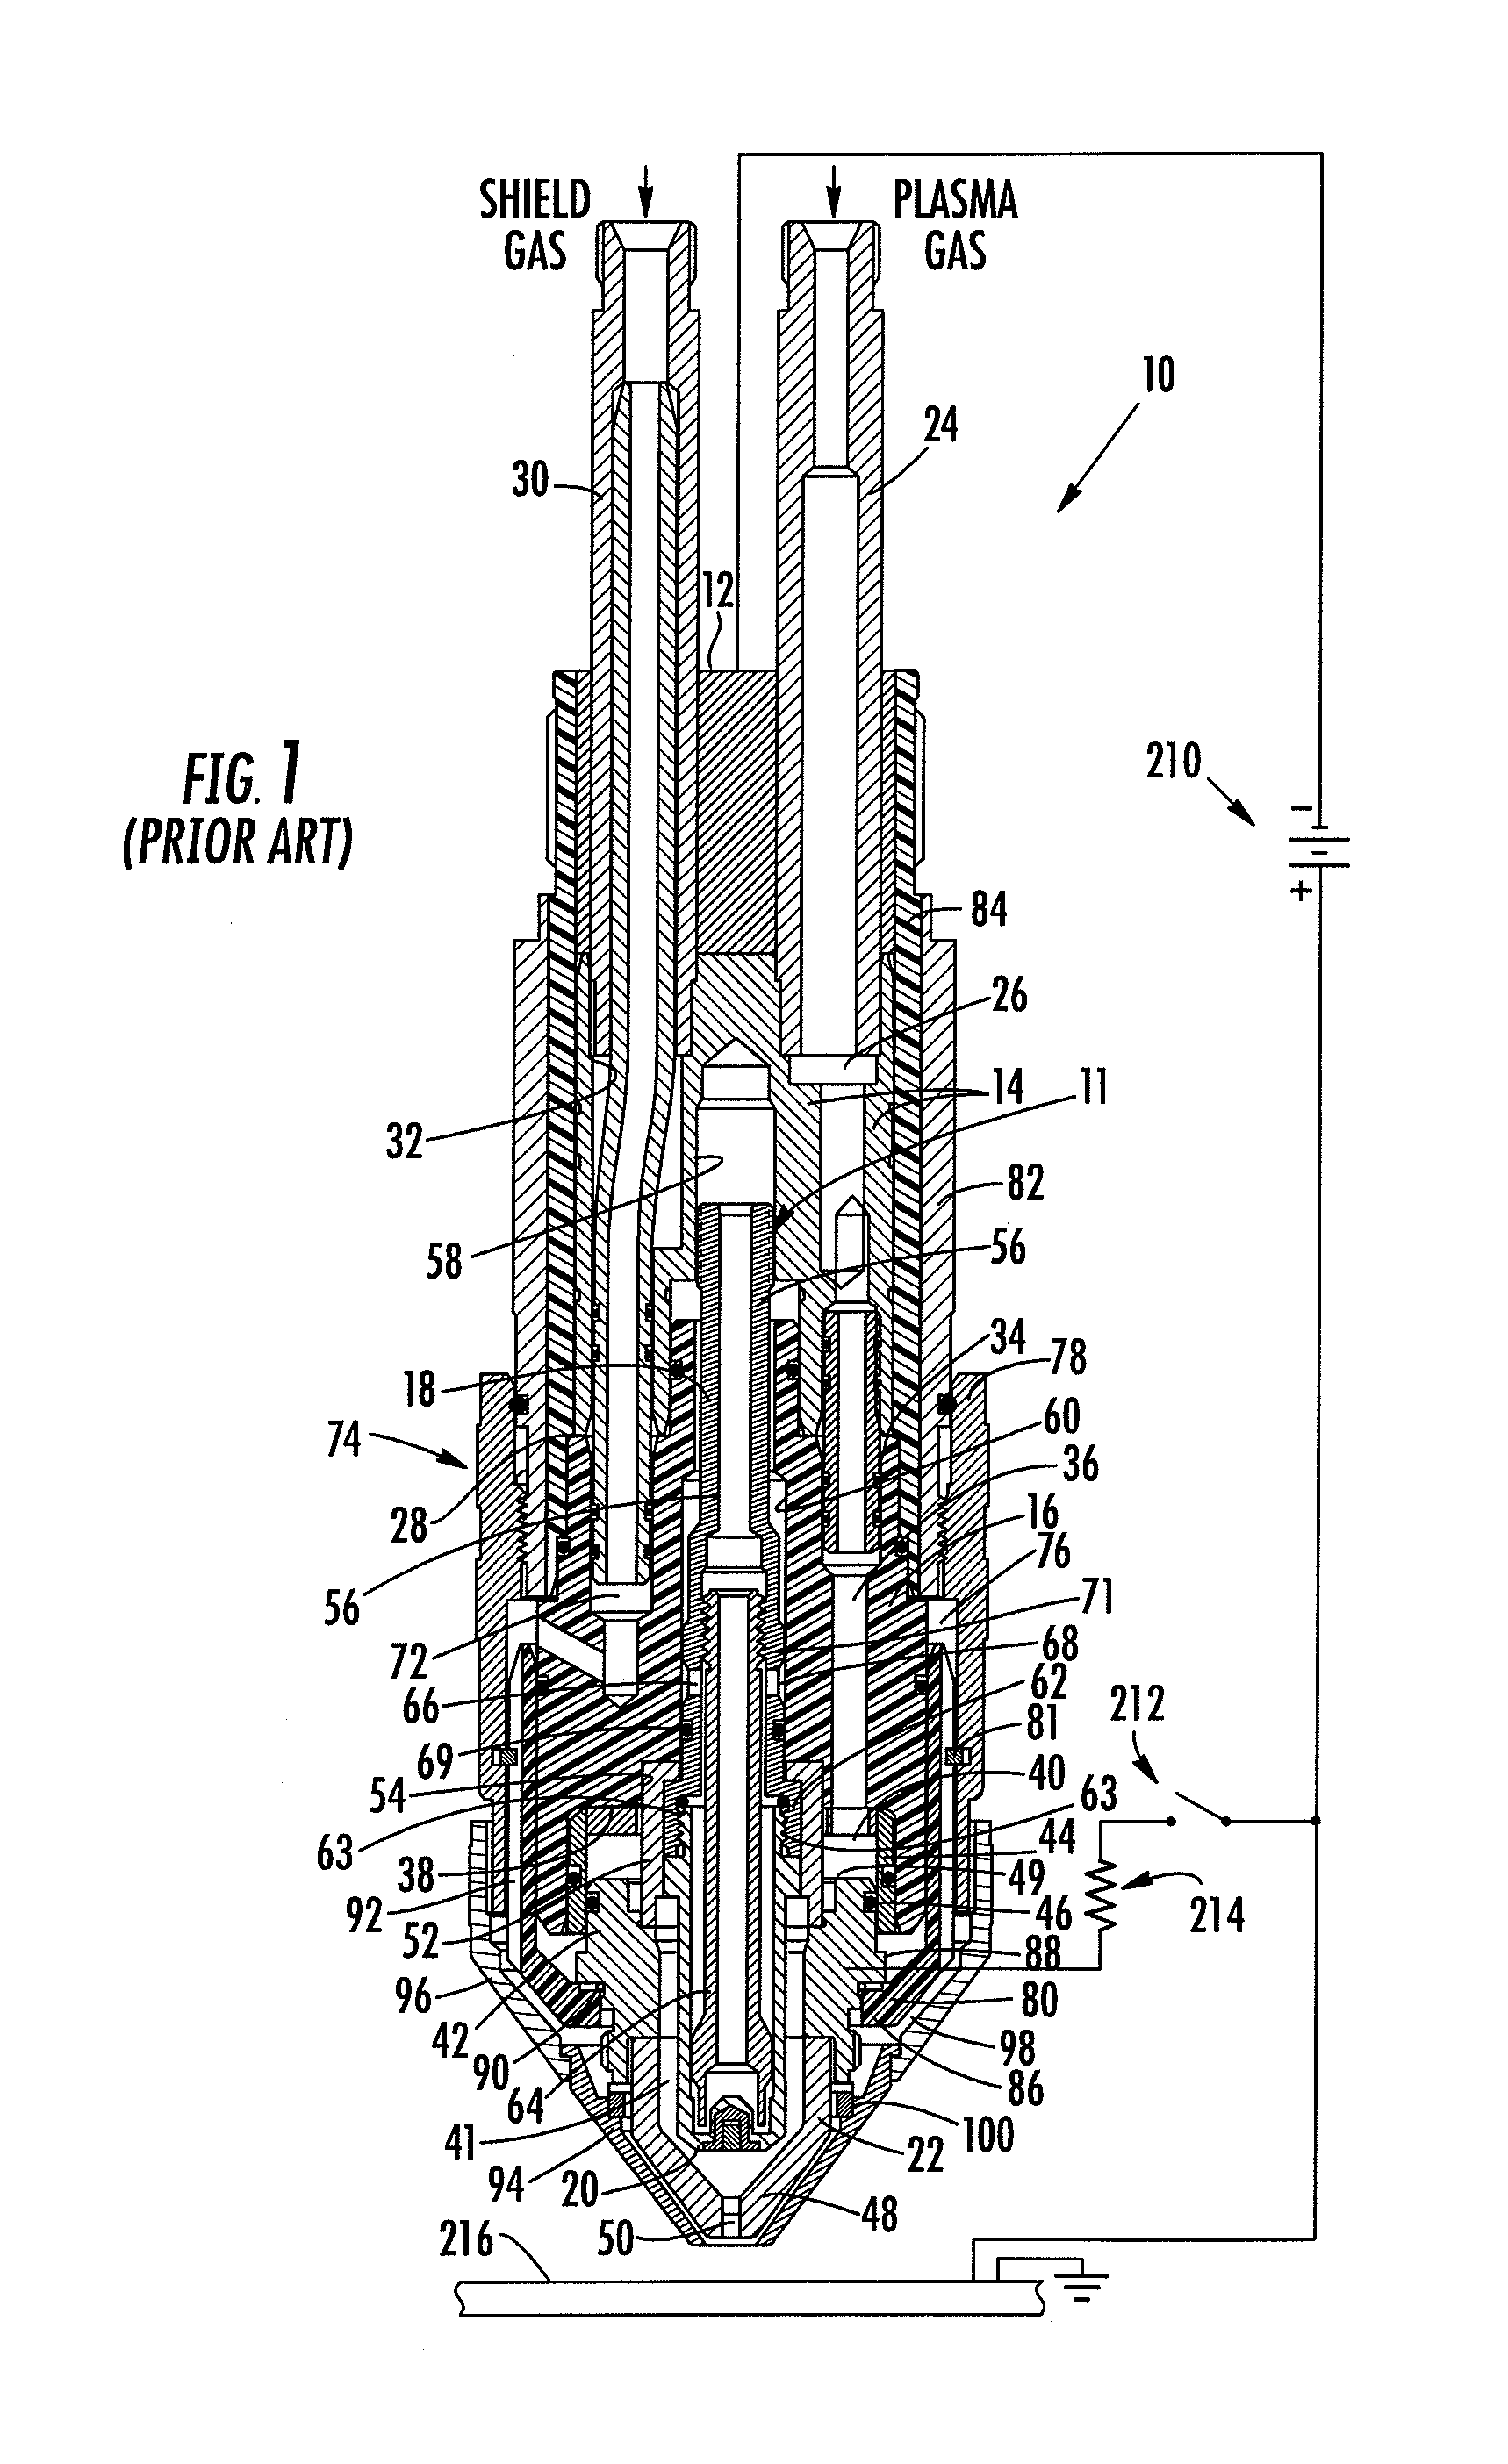 Electrode for plasma torch with novel assembly method and enhanced heat transfer